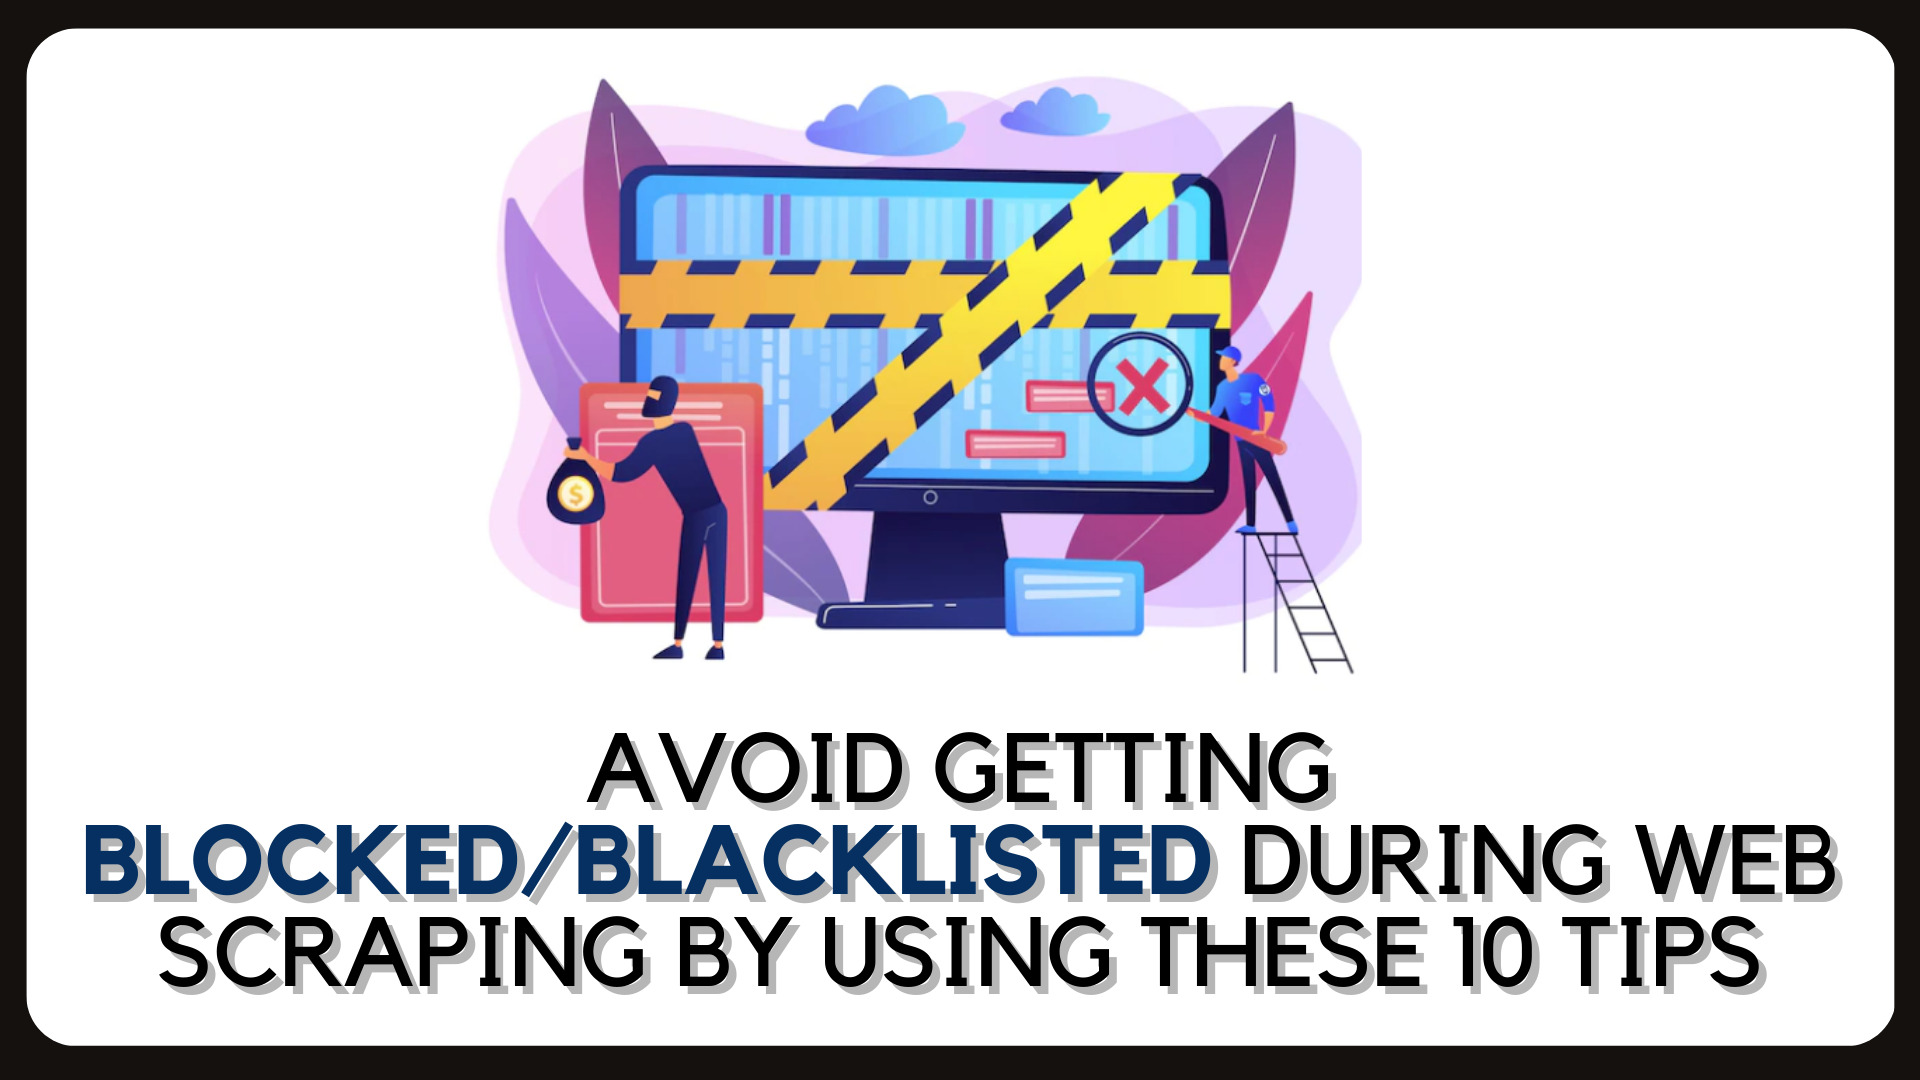 Avoid Getting BlockedBlacklisted During Web Scraping By Using These 10 Tips - Banner